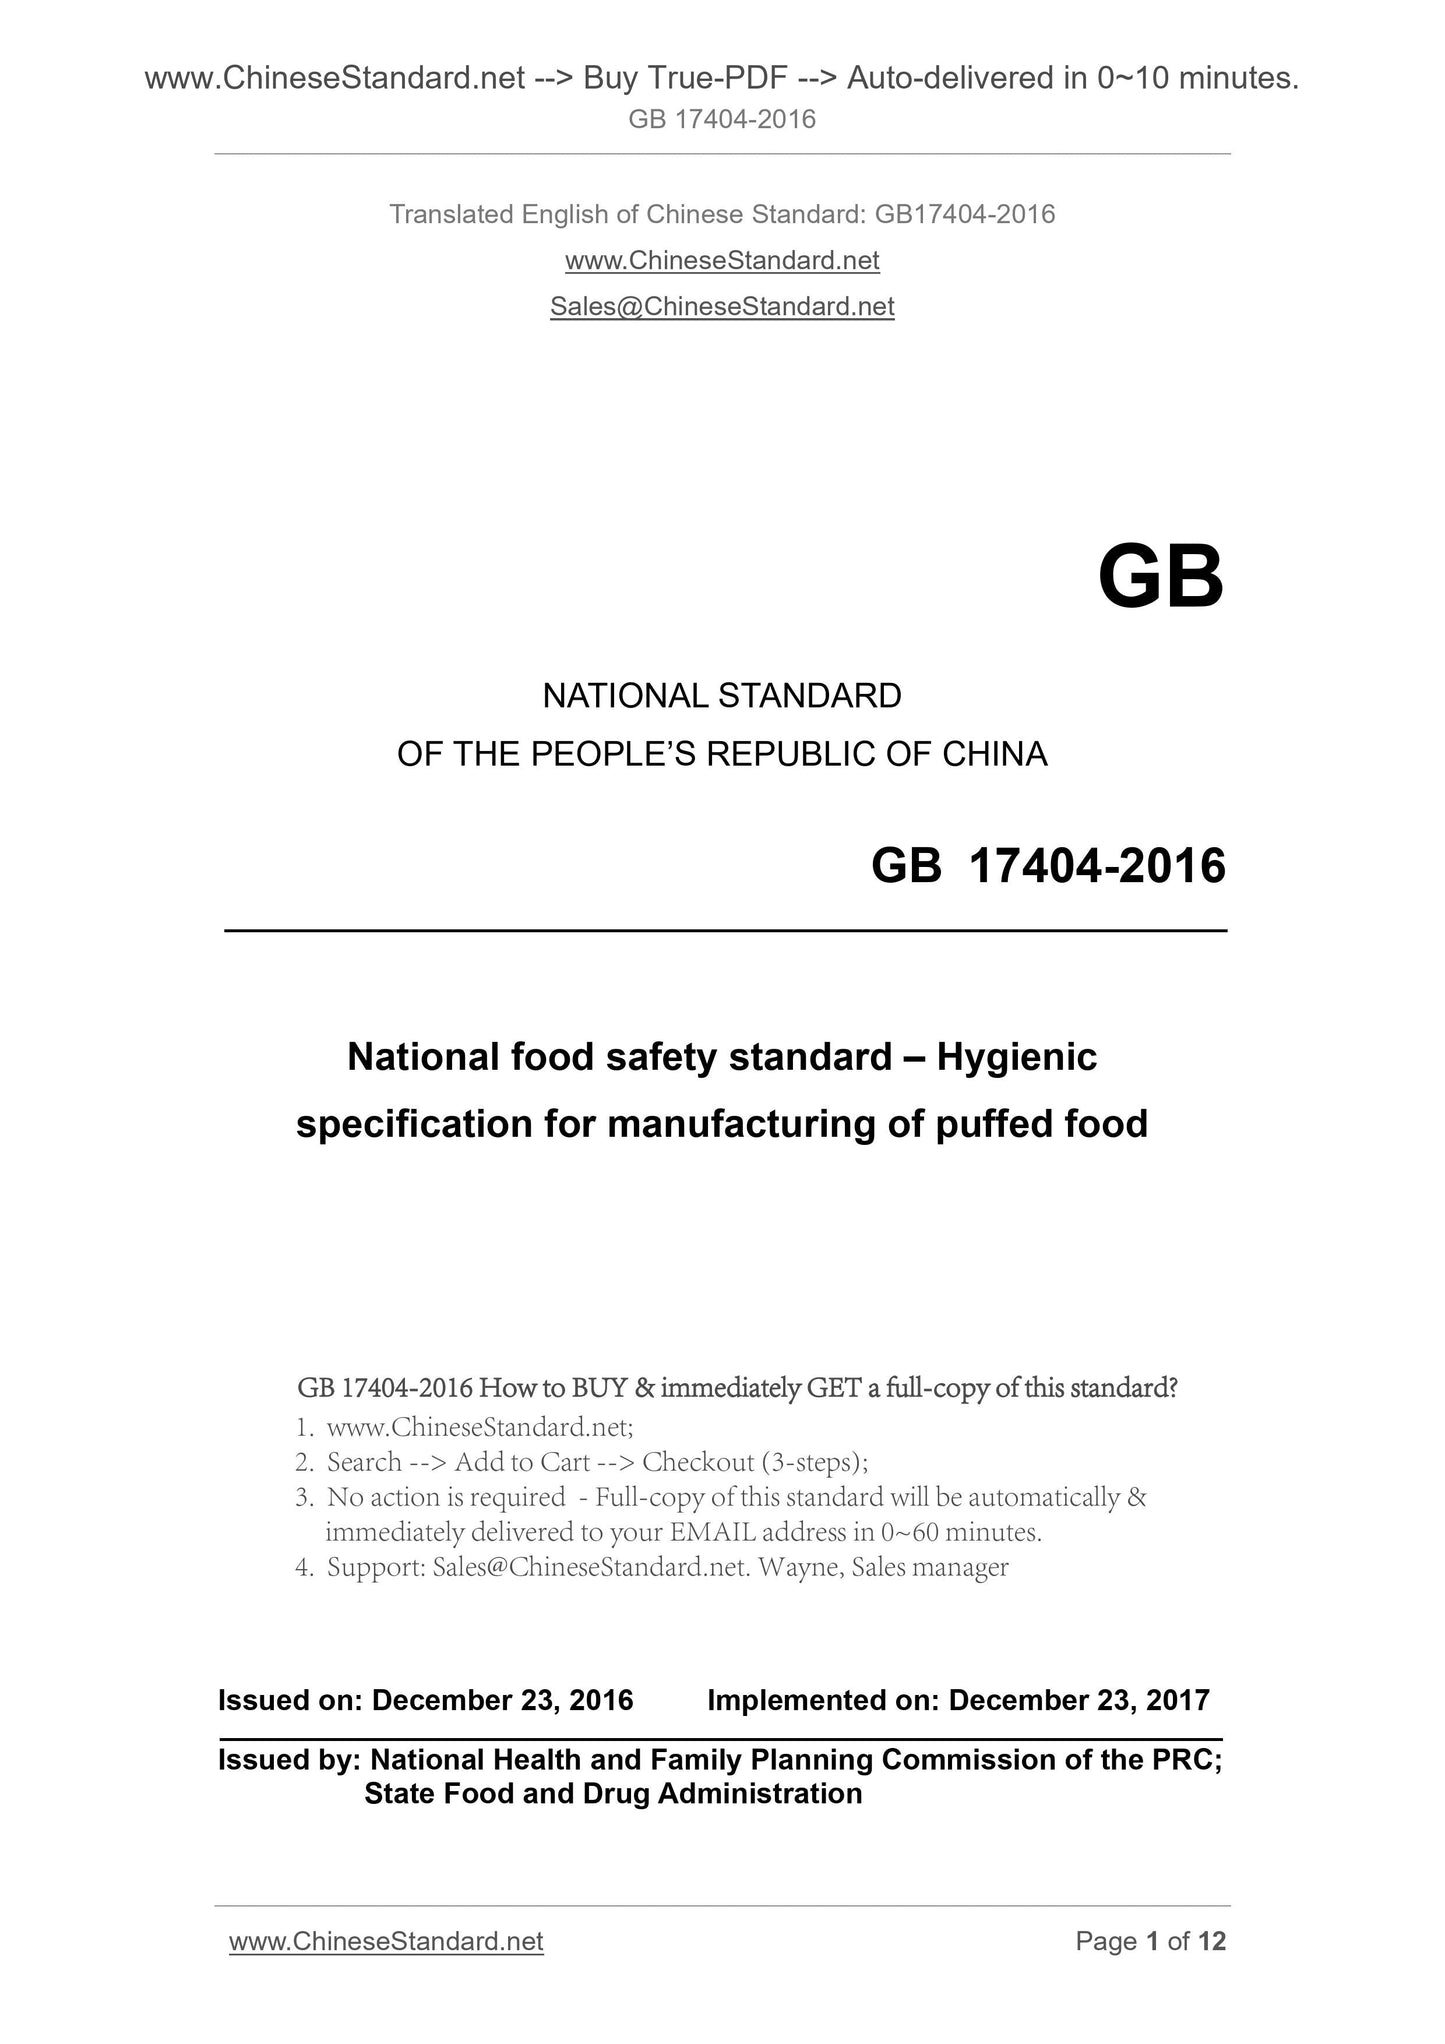 GB 17404-2016 Page 1